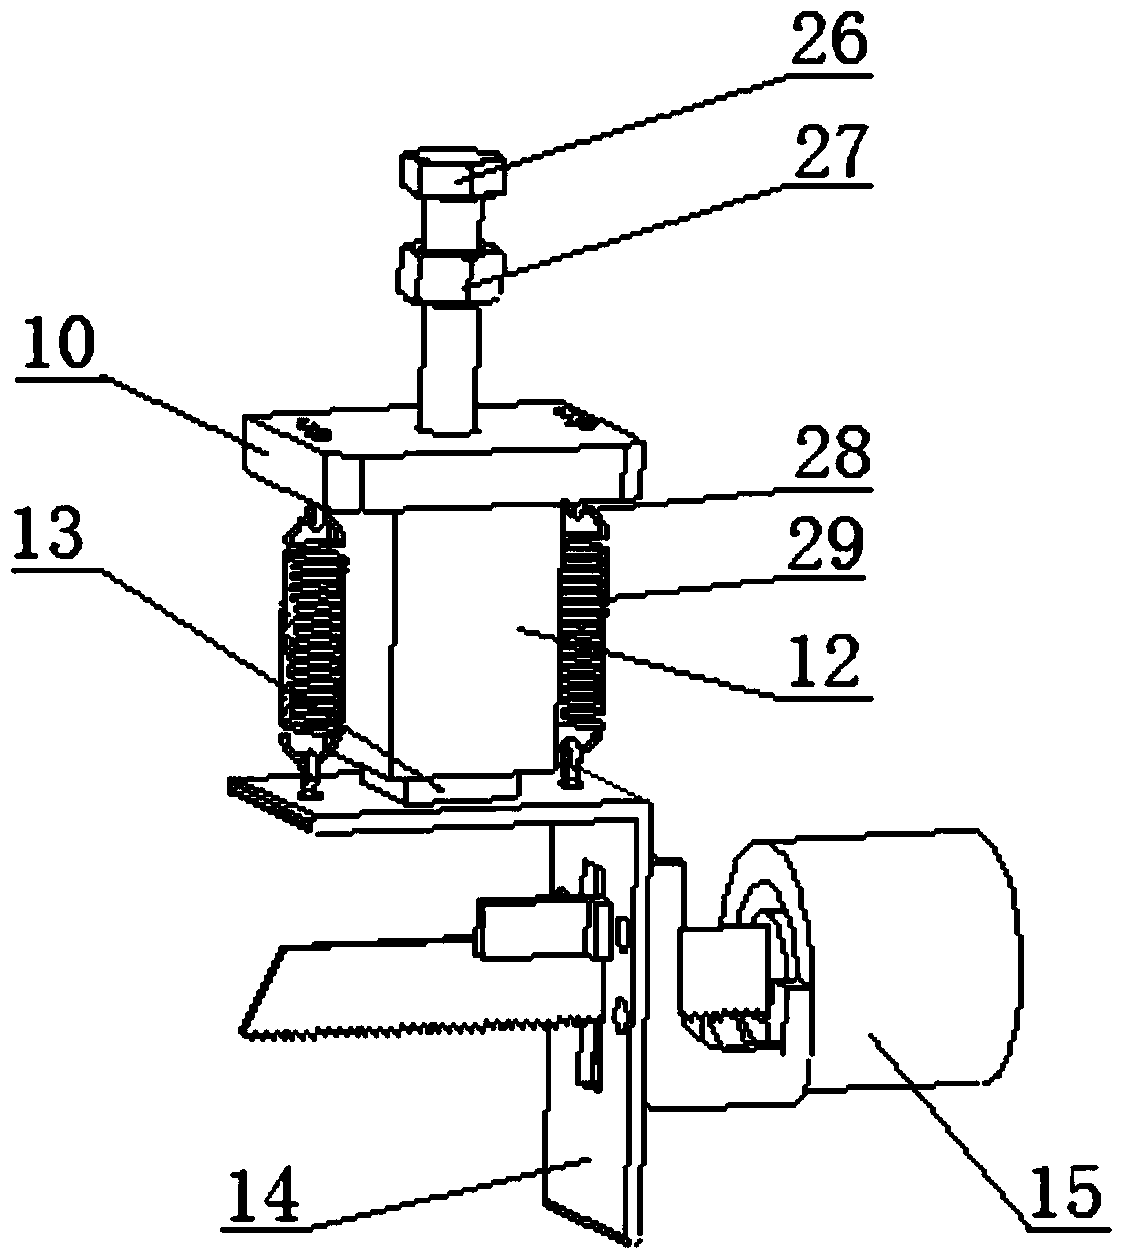 A large-section wire stripper